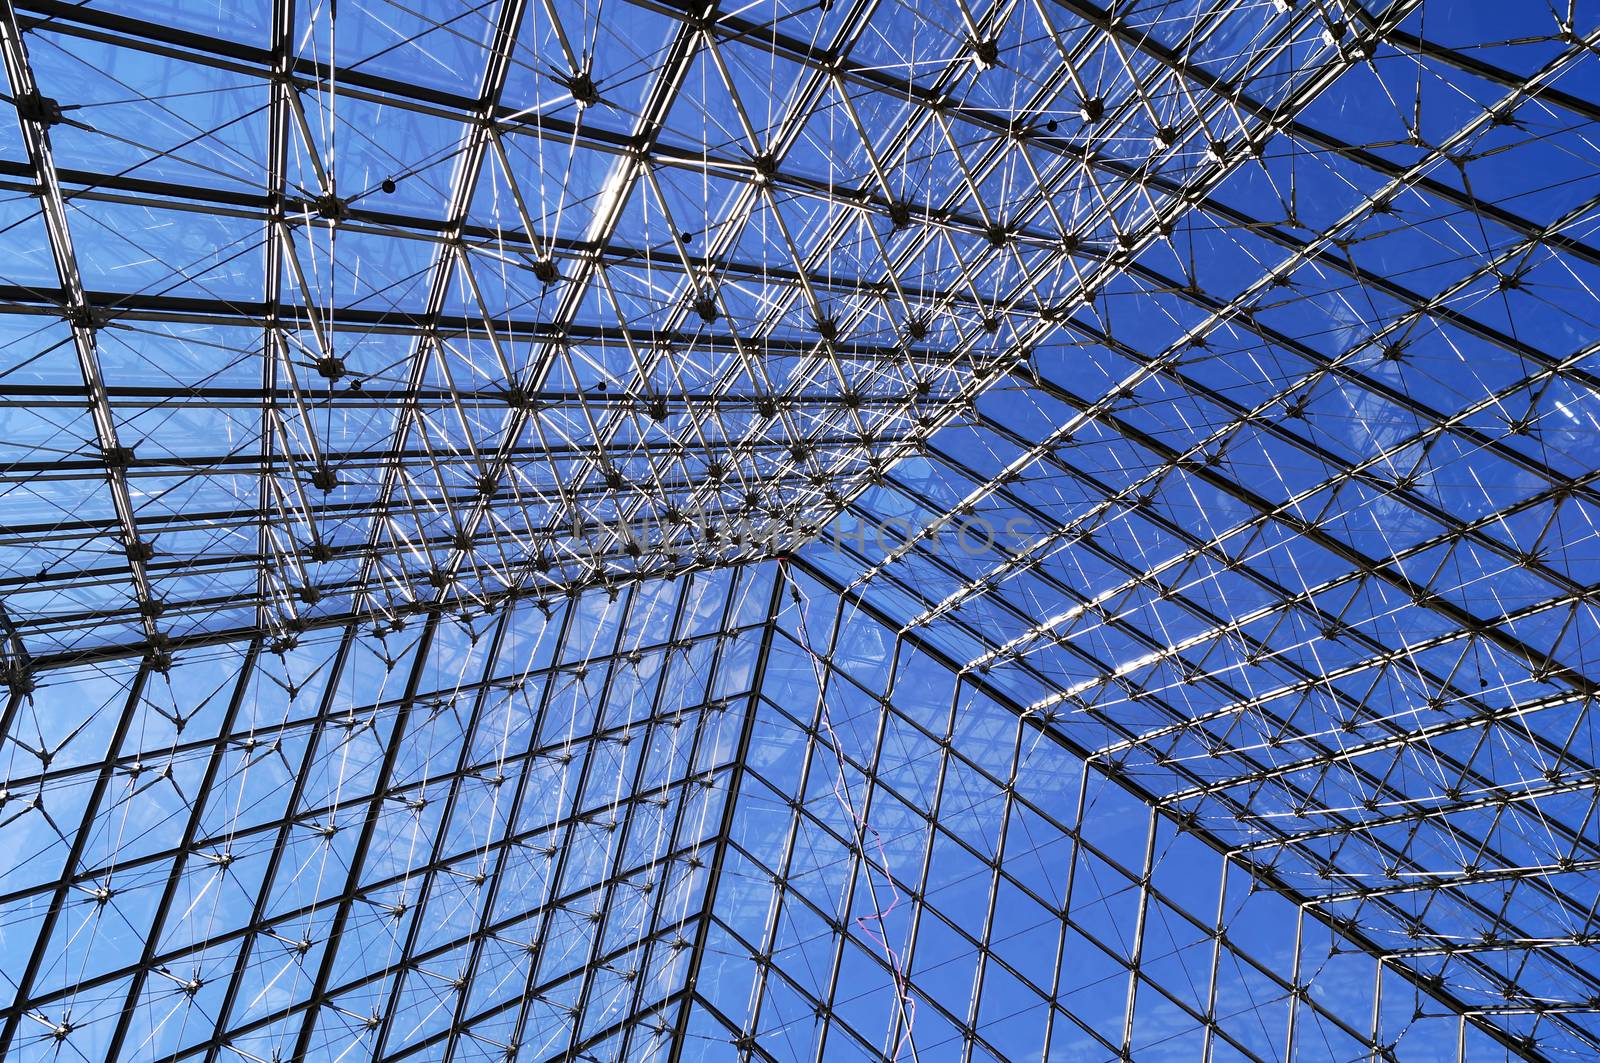 PARIS, FRANCE - SEPTEMBER 28, 2015: Glass pyramid at the Louvre, the world's largest museum in Paris, France 